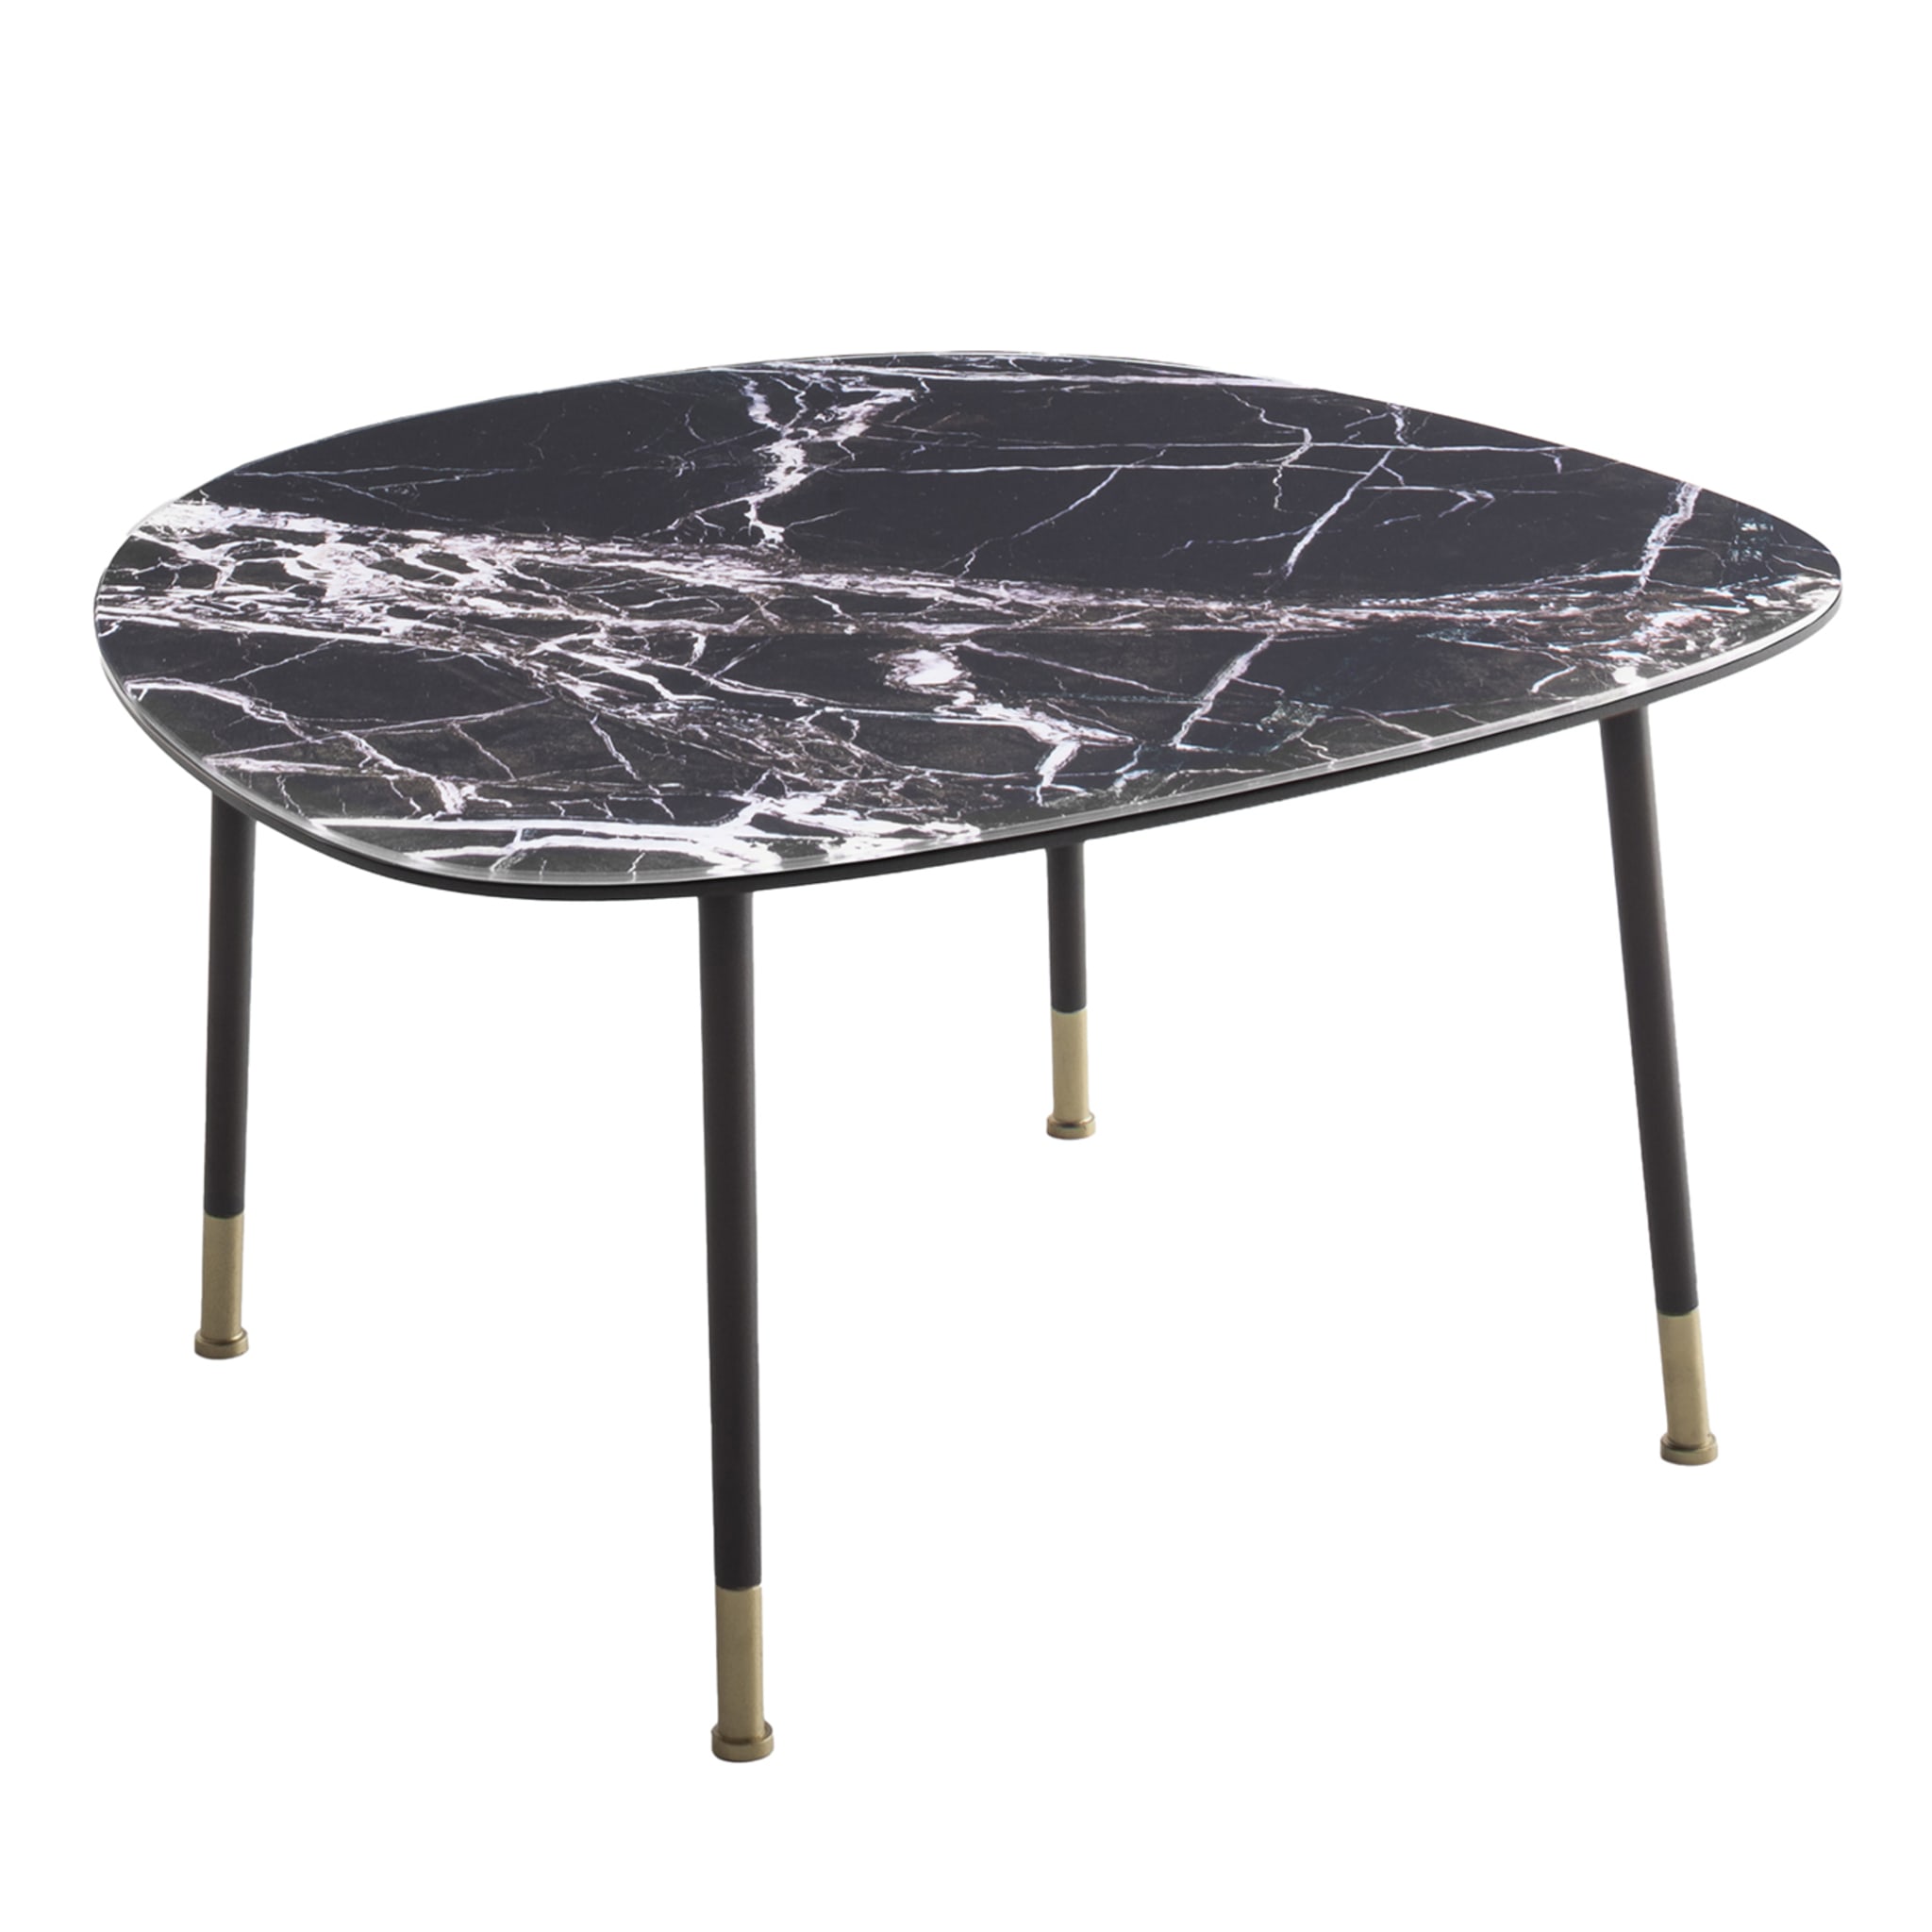 Pebble Large Breccia Imperiale Marble-Effect Coffee Table - Main view